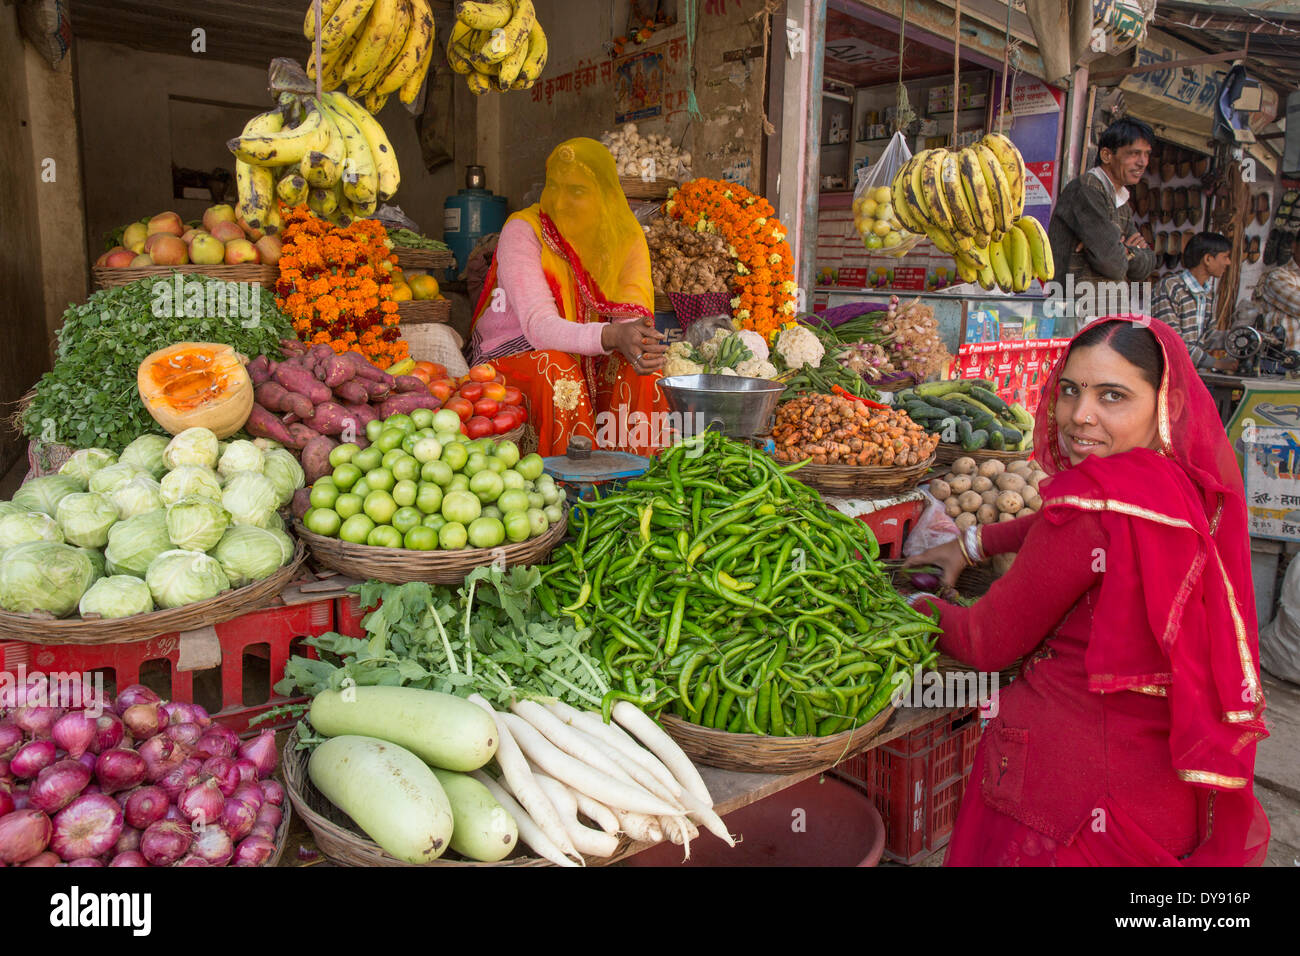 Vegetables market, India, Asia, India, market, vegetables, woman, traditional, Indian, Rajasthan, Stock Photo